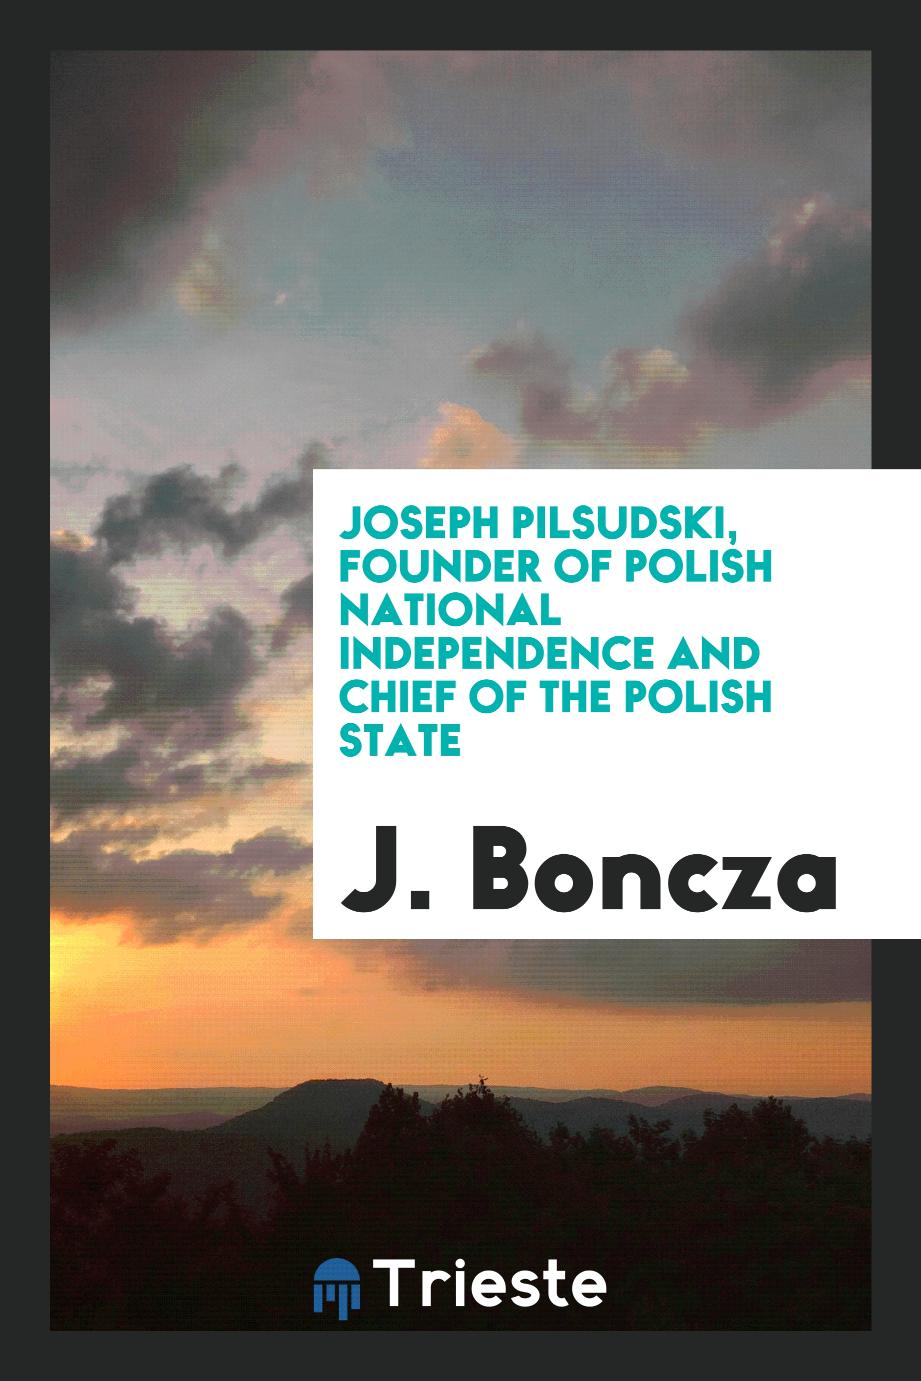 Joseph Pilsudski, Founder of Polish National Independence and Chief of the Polish State